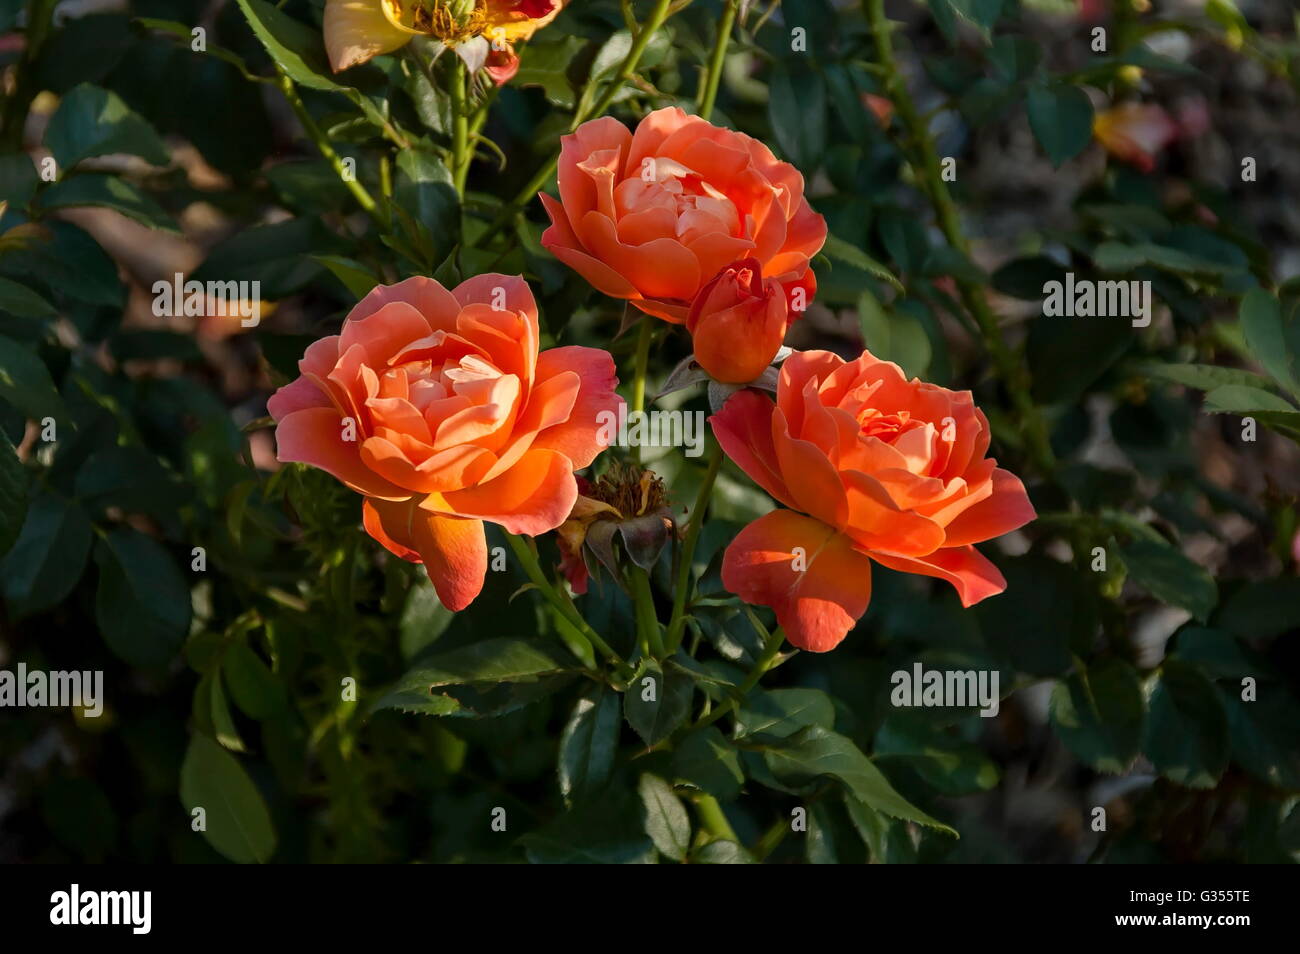 Walter Rose High Resolution Stock Photography and Images   Alamy